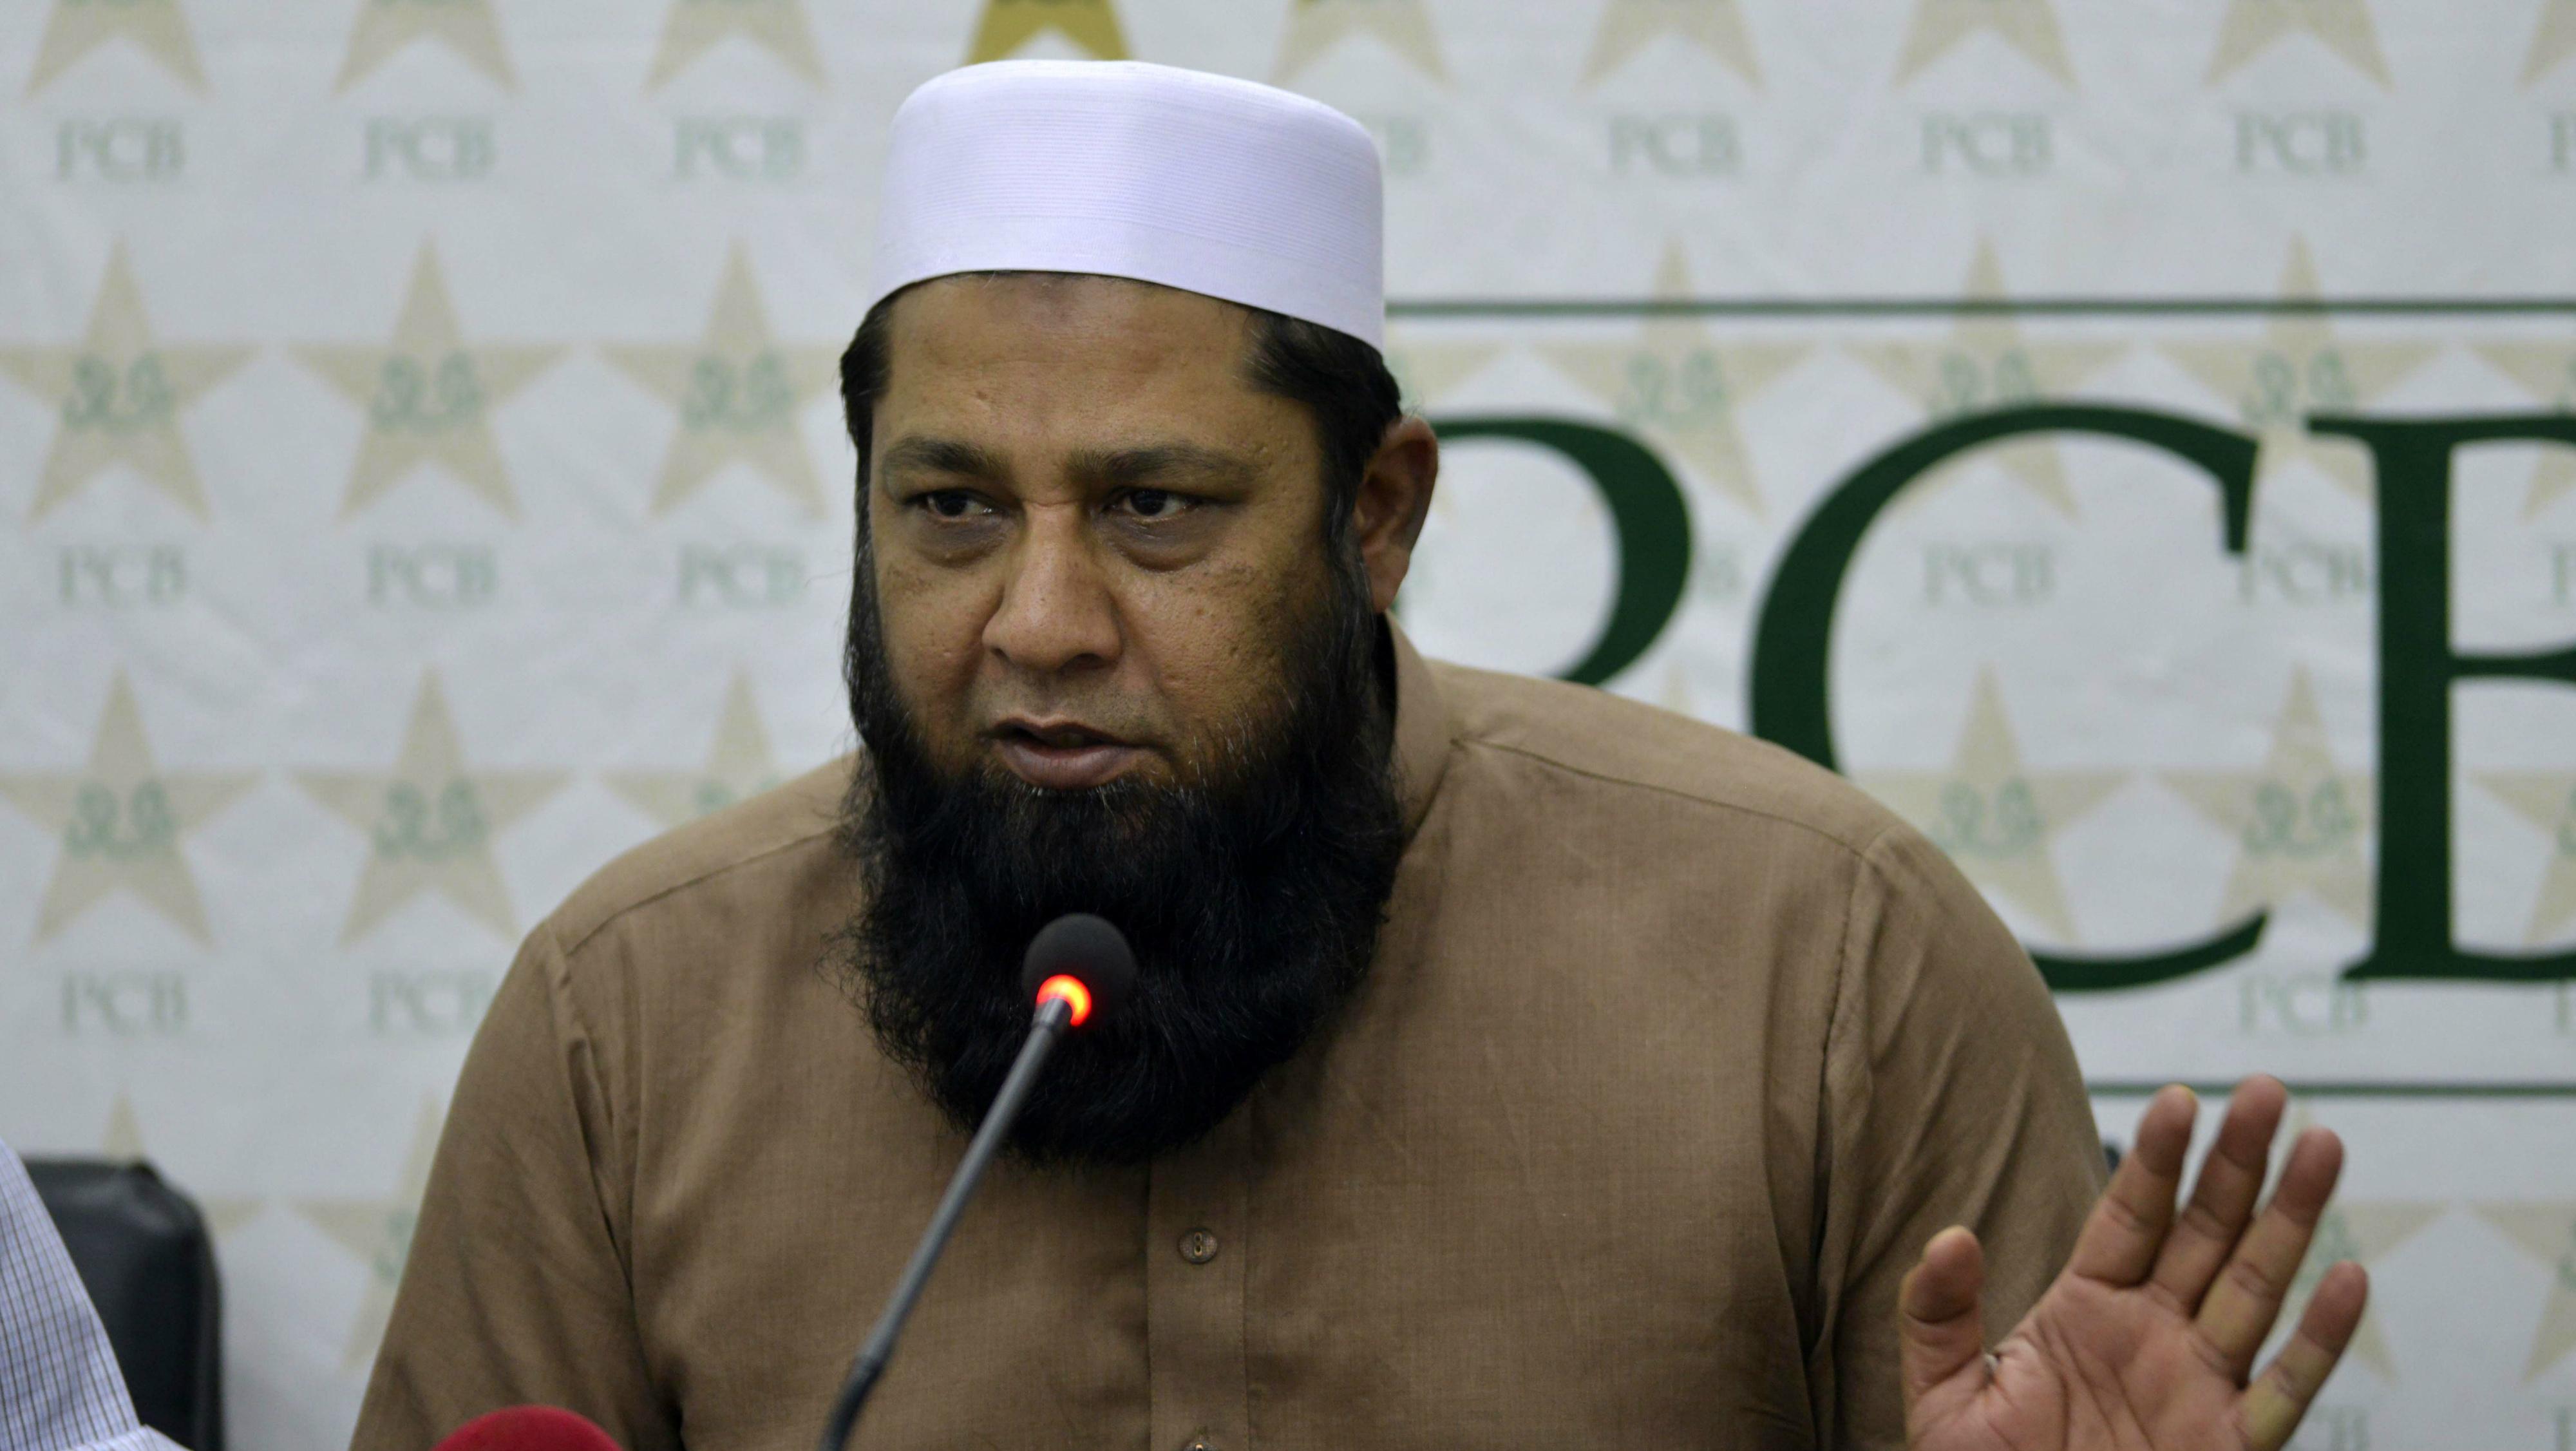 Inzamam-ul-Haq lauds India for assemble 2 national team simultaneously